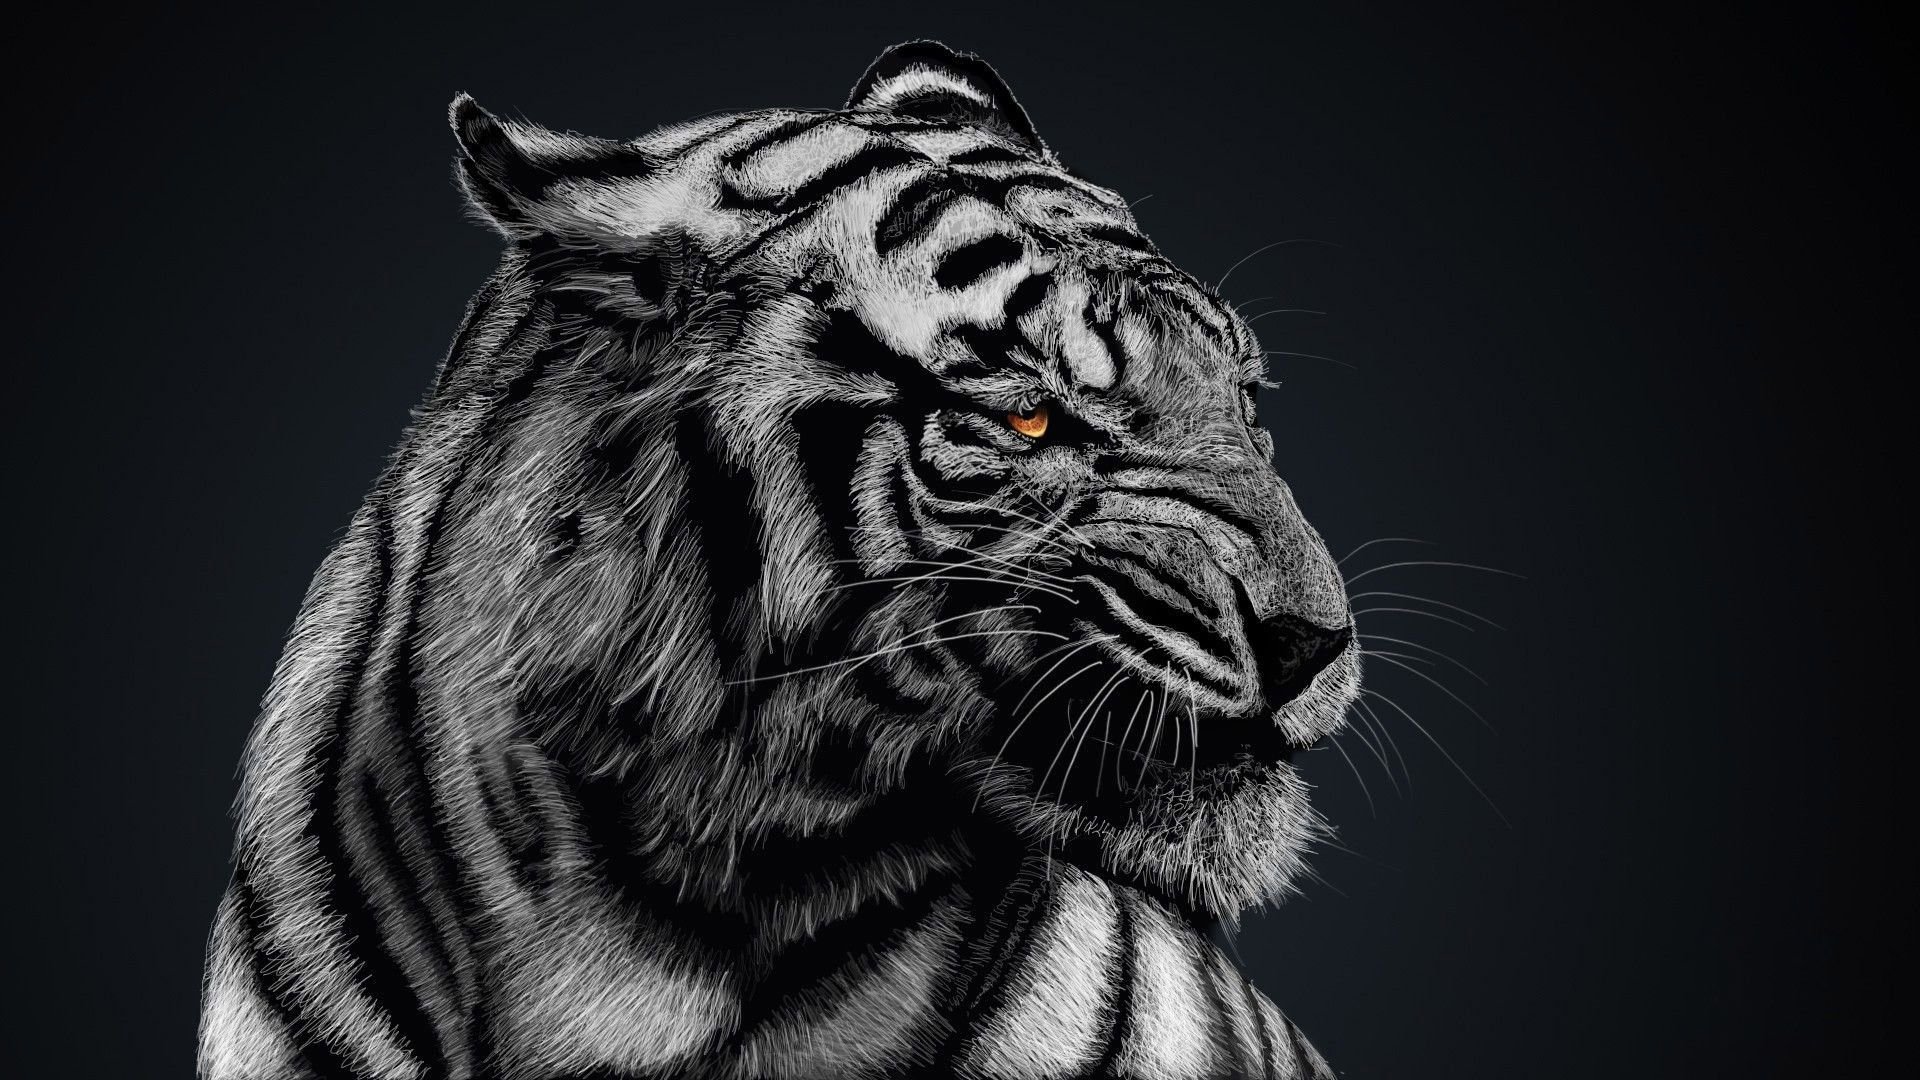 Black And White Tiger Wallpaper High Quality, Animal Wallpaper